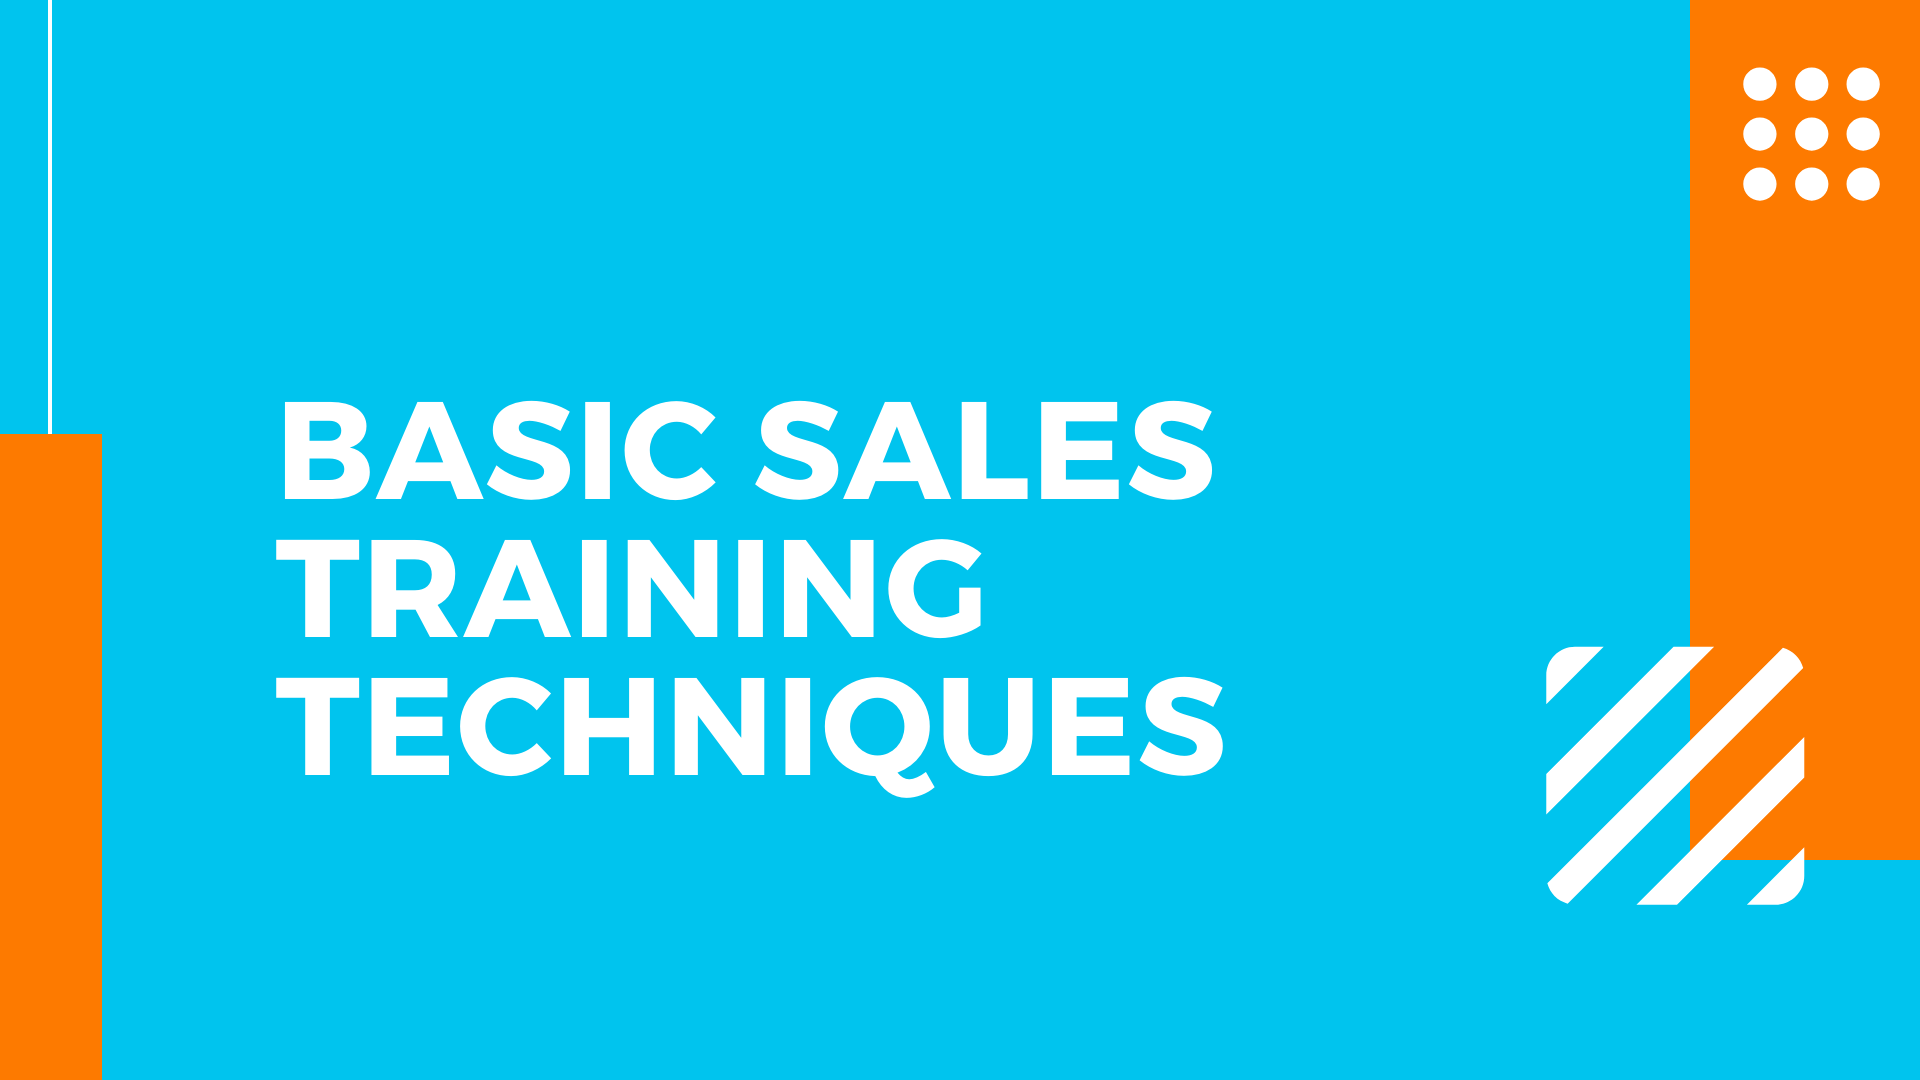 Basic Sales Training Techniques for Small Business Owners